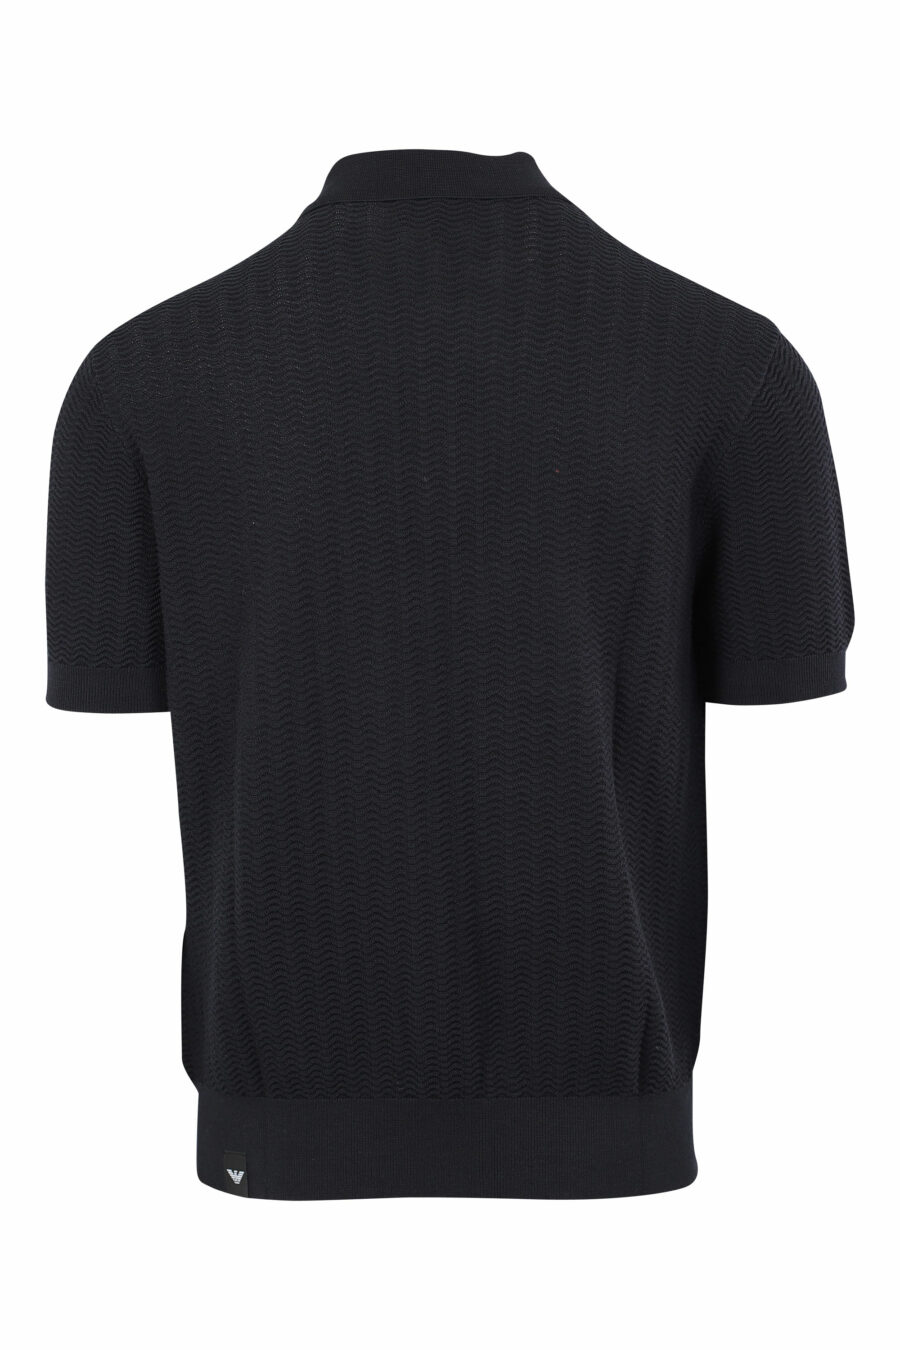 Dark blue knitted polo shirt with mini logo - IMG 9671